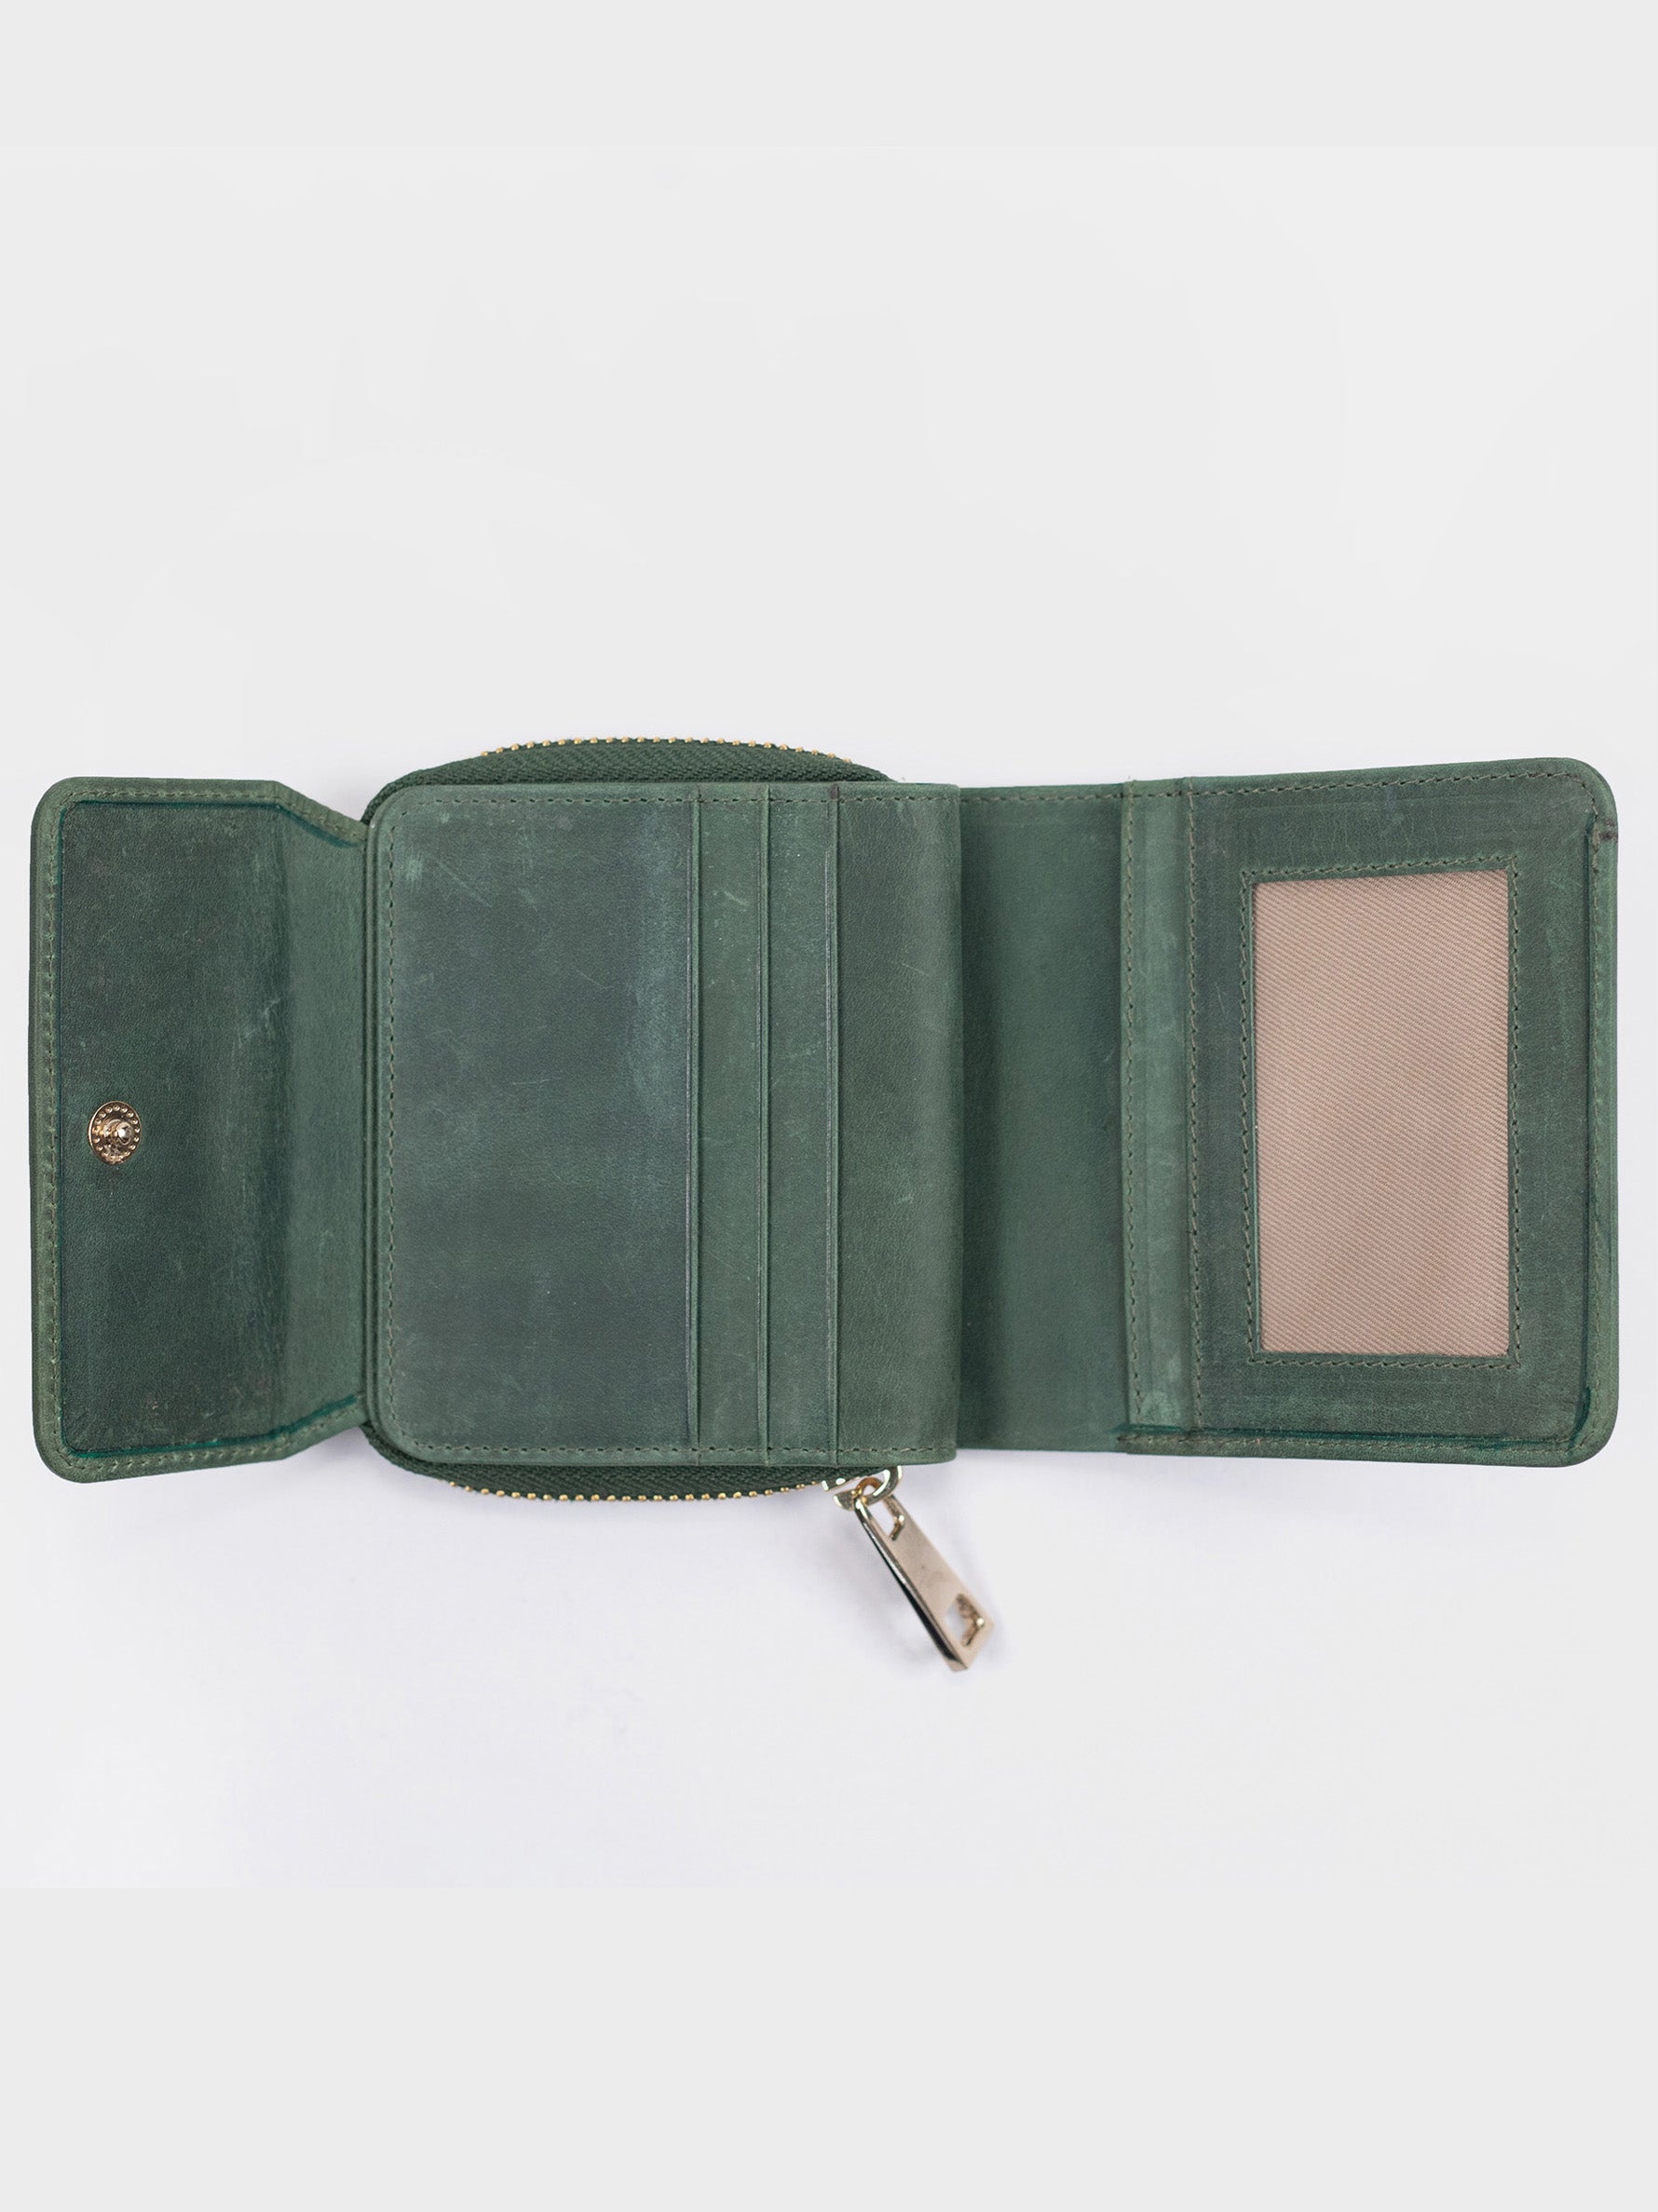 Premium  Distressed Vegetable Tanned Leather Green Mini Wallet for Women Tan & Loom